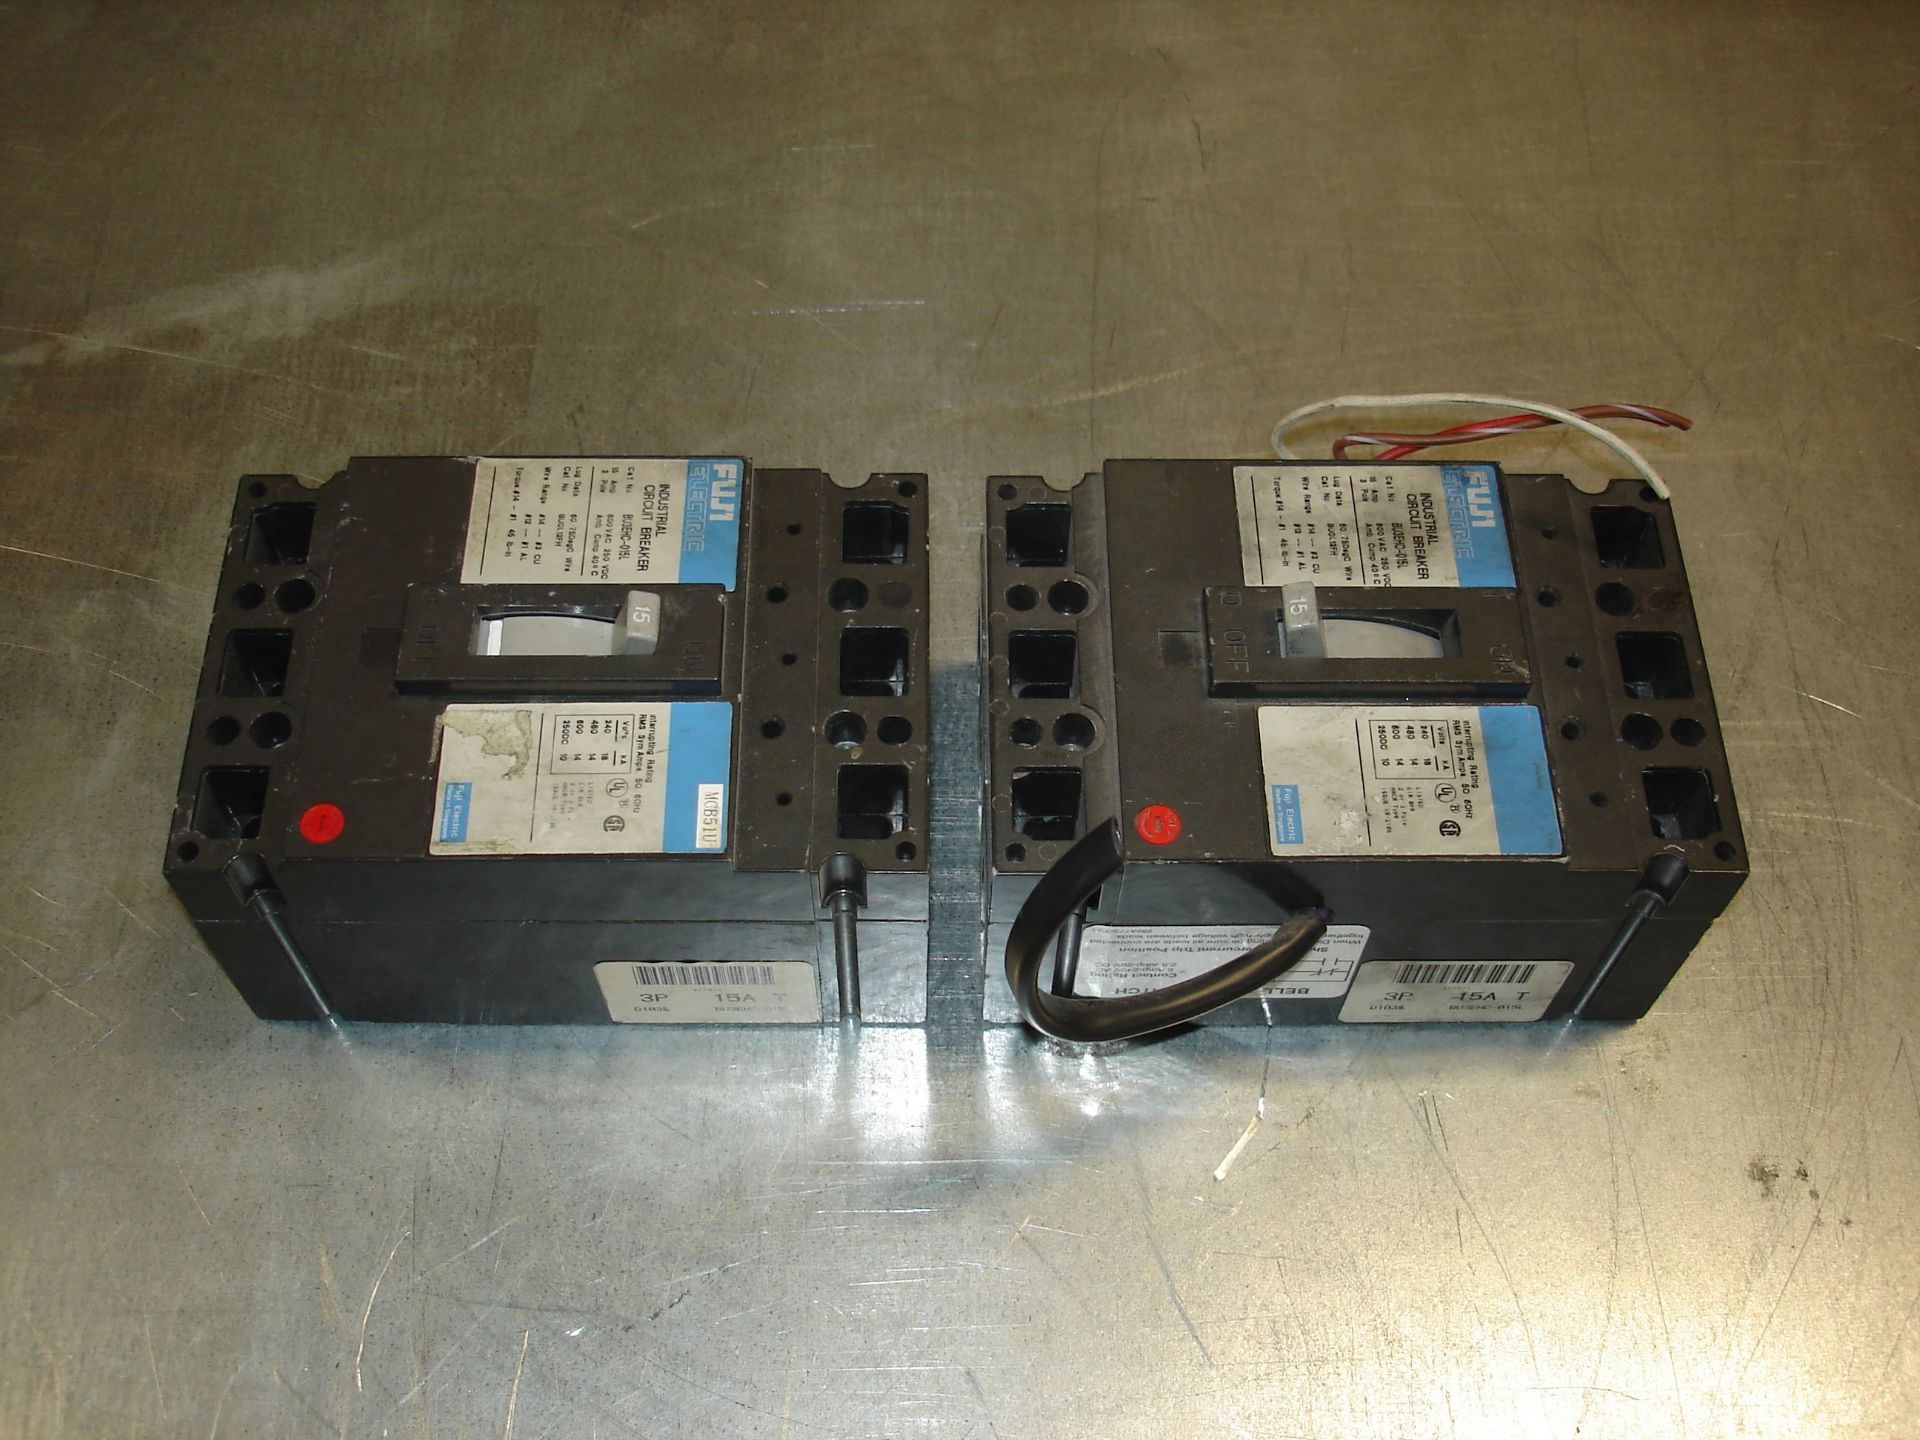 (2) BU3EHC-015L FUJI ELECTRIC INDUSTRIAL CIRCUIT BREAKER USED Pickup your lot(s) for free! - Image 4 of 5